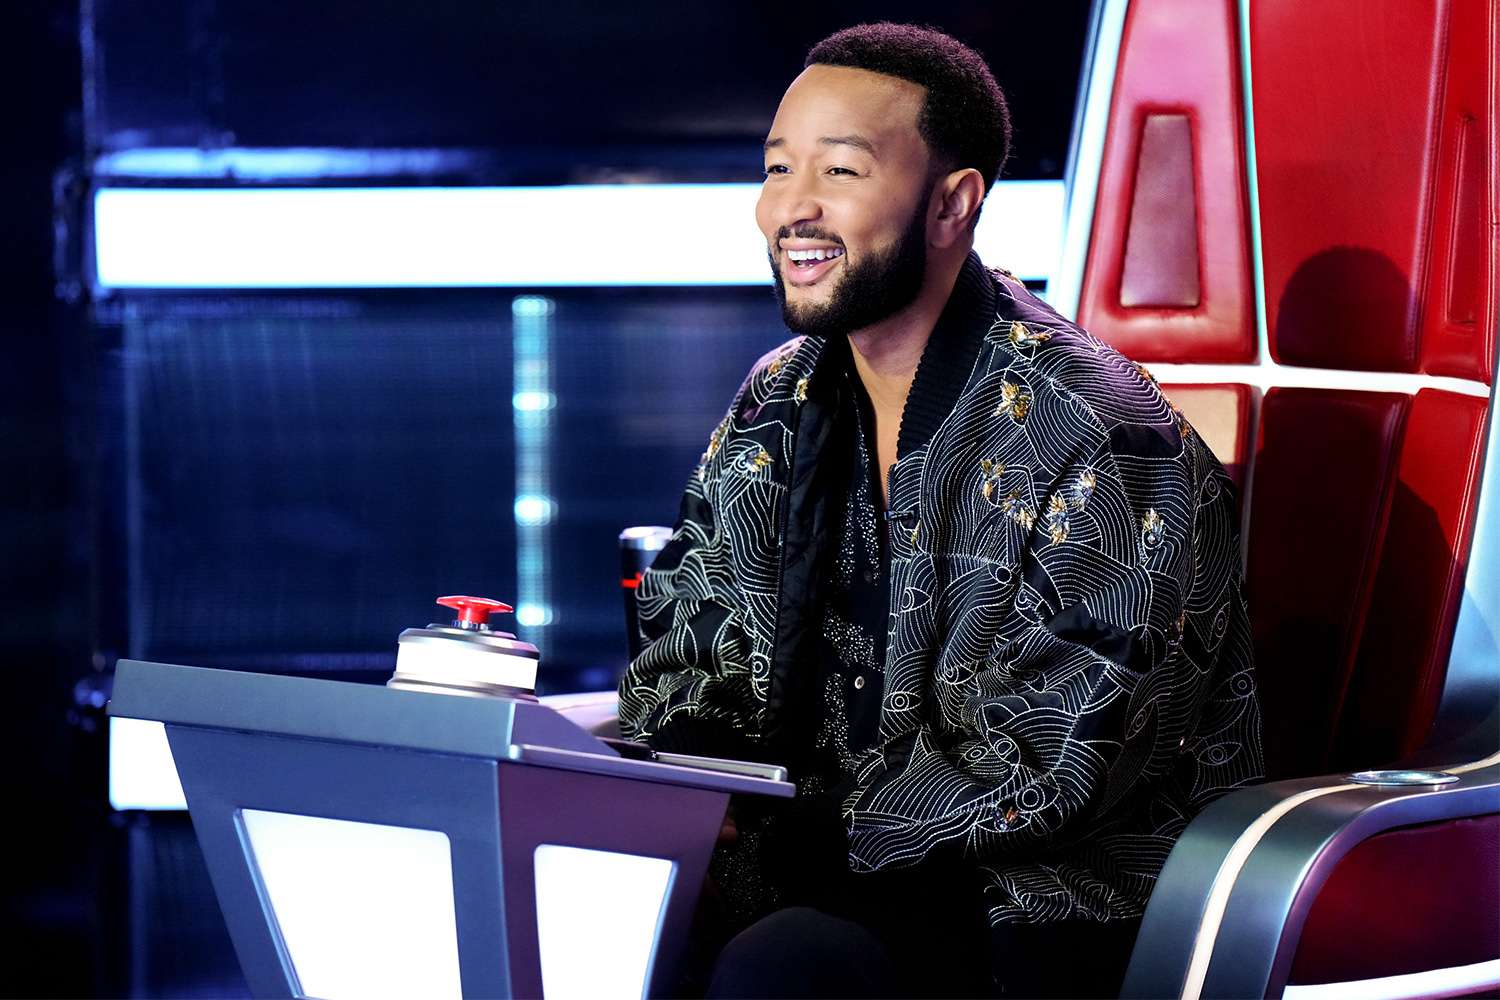 THE VOICE -- "Knockout Rounds" Episode 2214 -- Pictured: John Legend -- (Photo by: Tyler Golden/NBC)